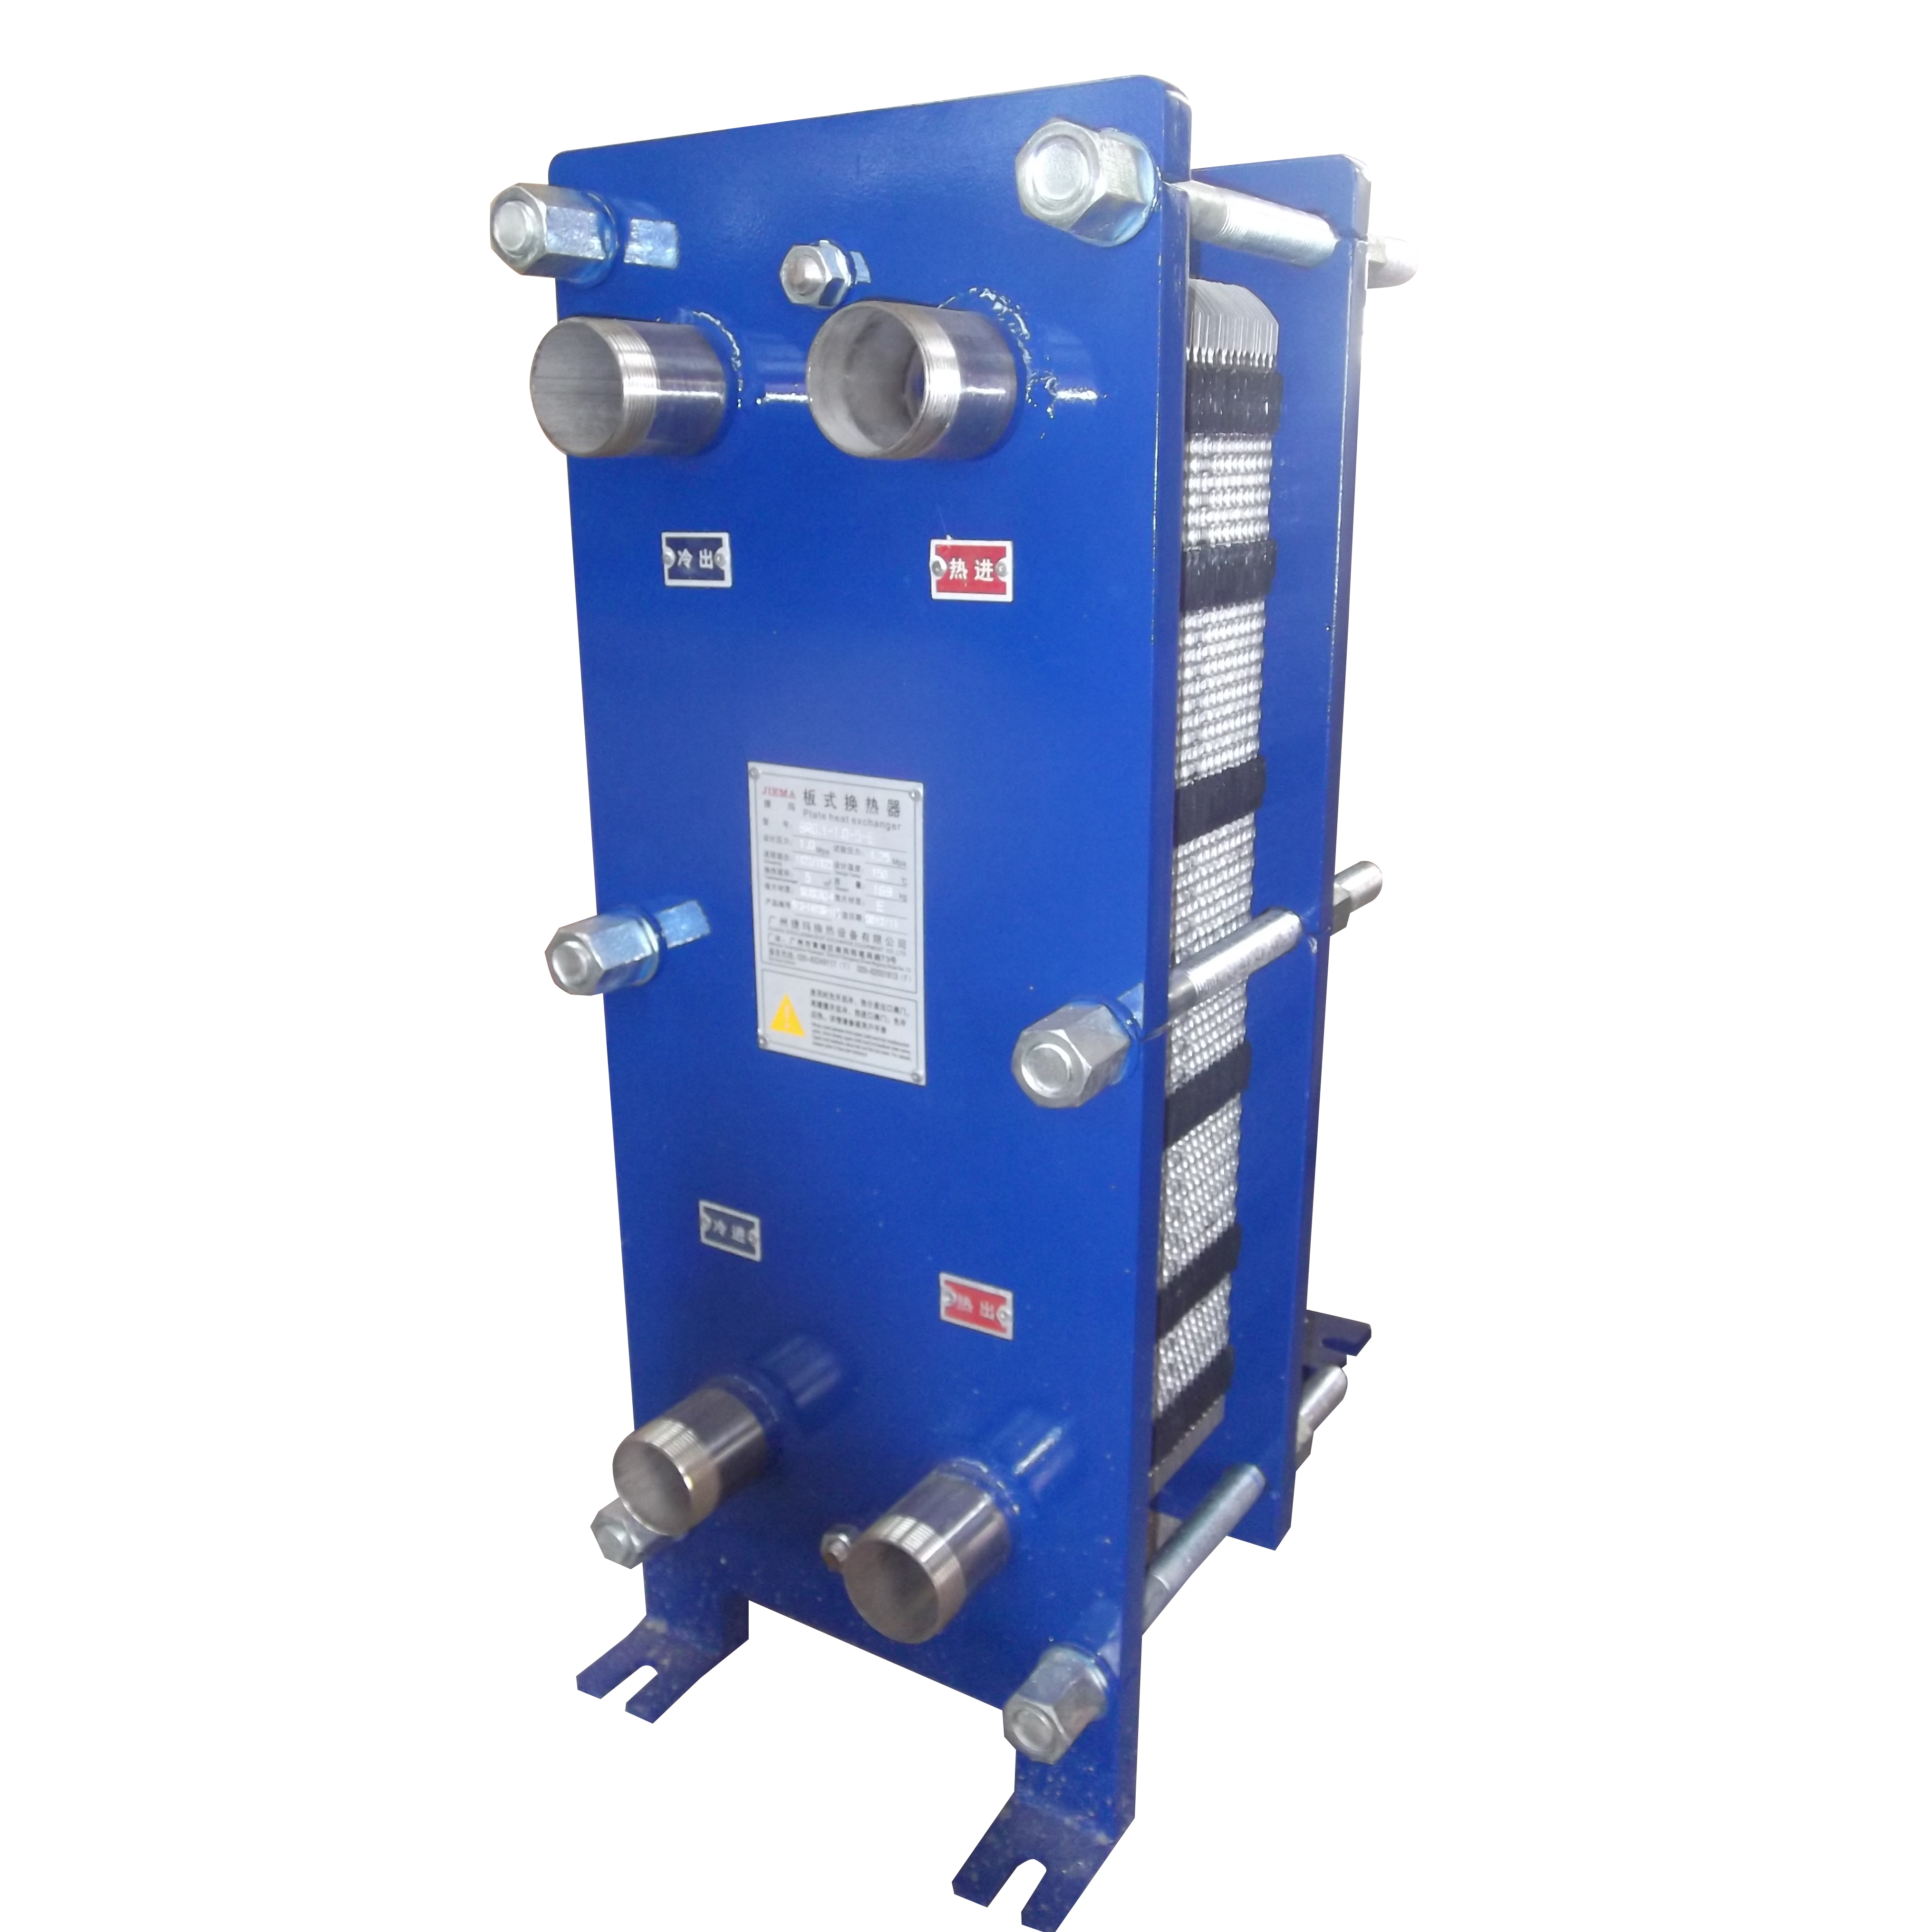 Gasketed Plate Heat Exchanger for Pasteuring